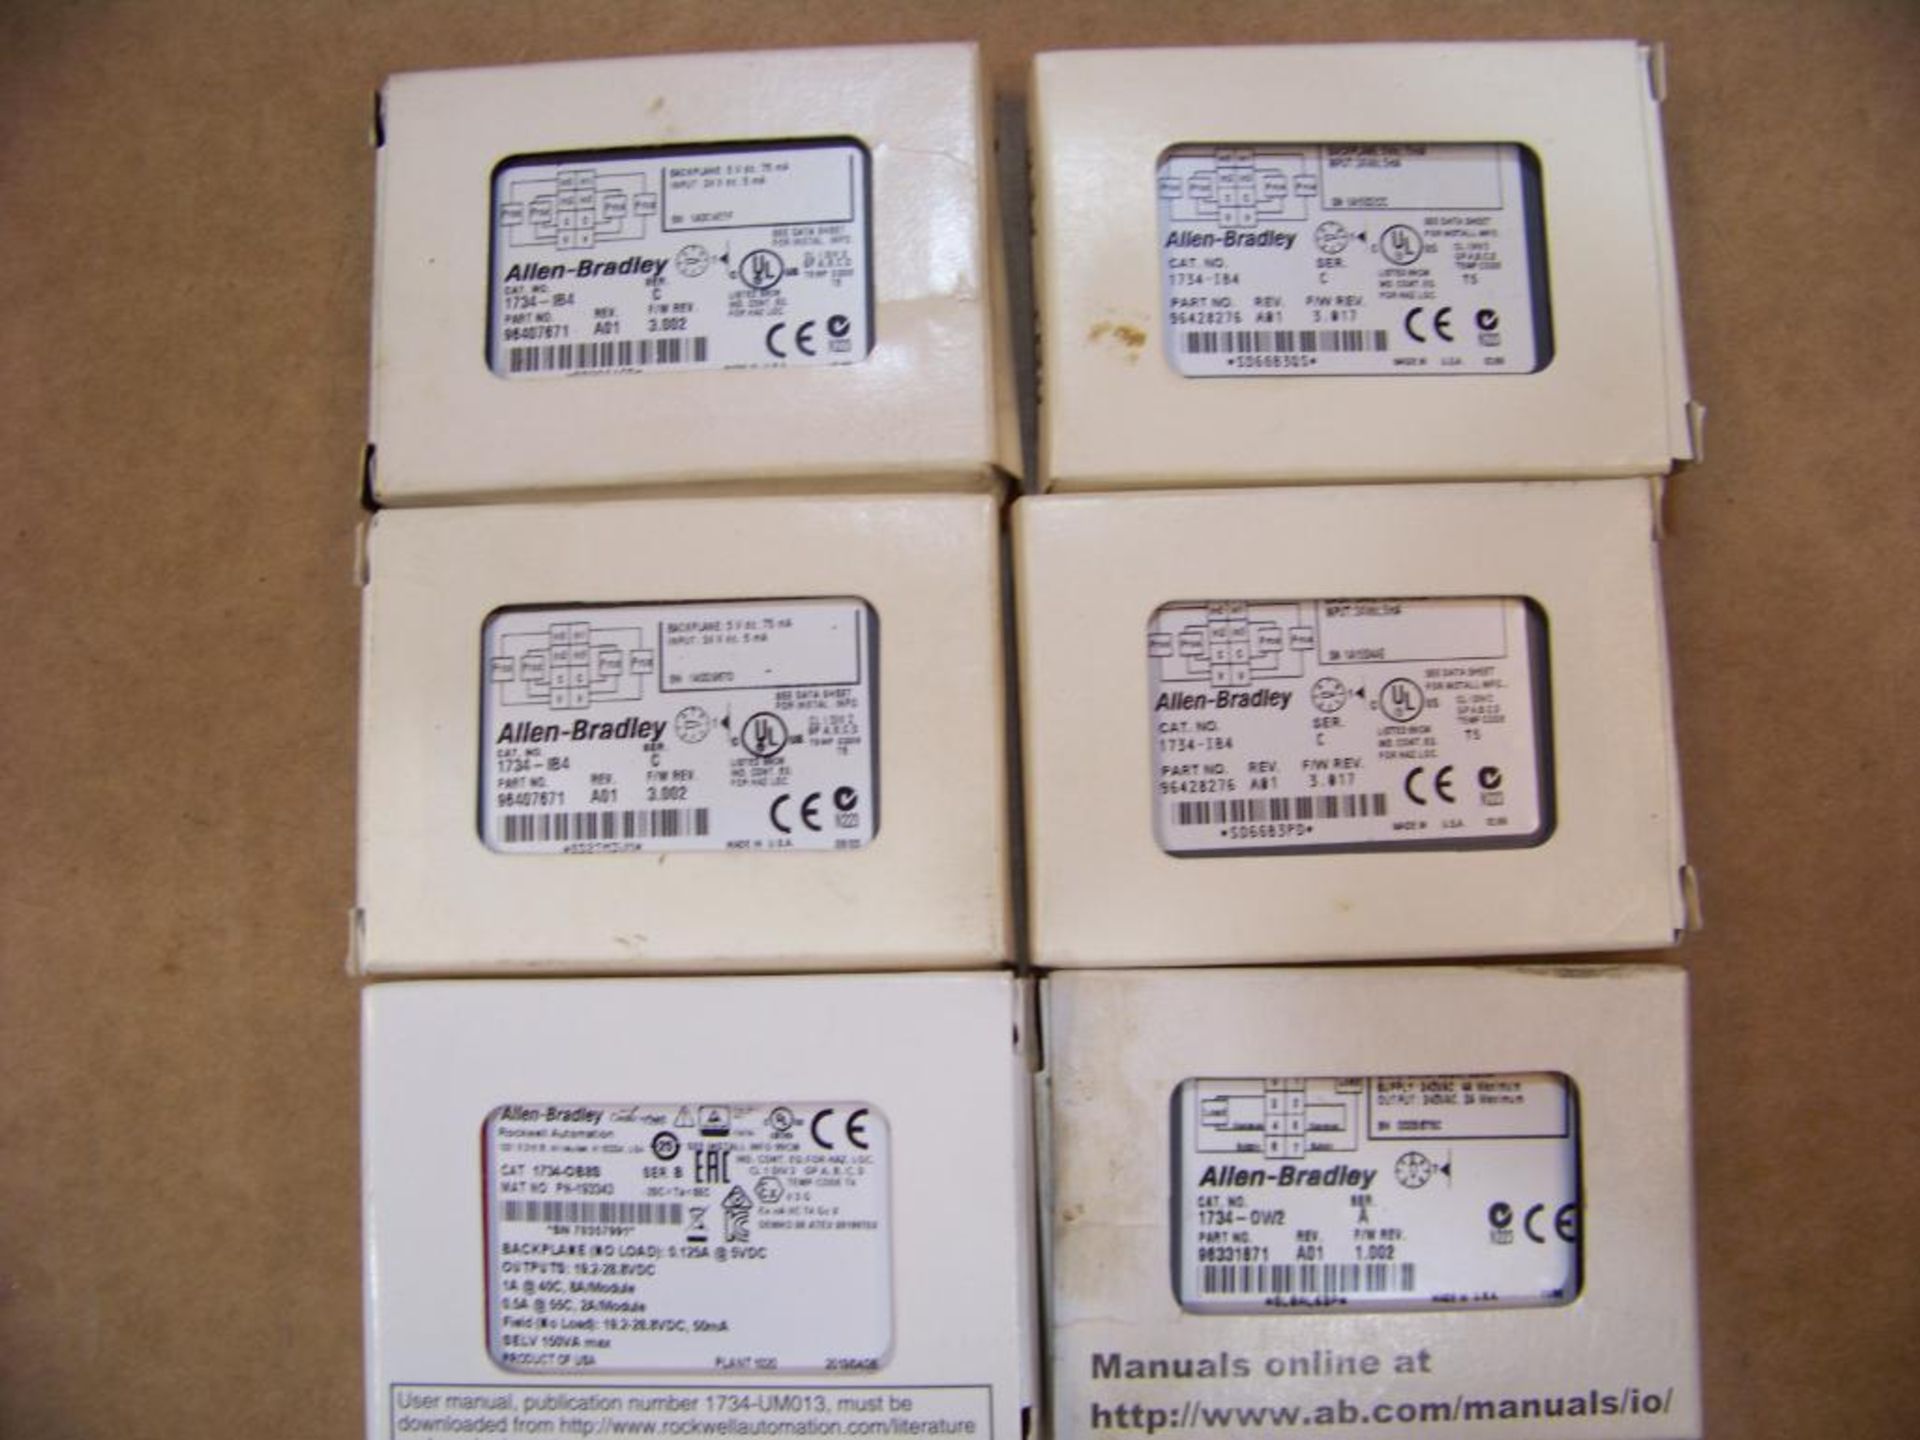 6 ALLEN BRADLEY I/O MODULES, NEW IN BOXES - Image 2 of 2